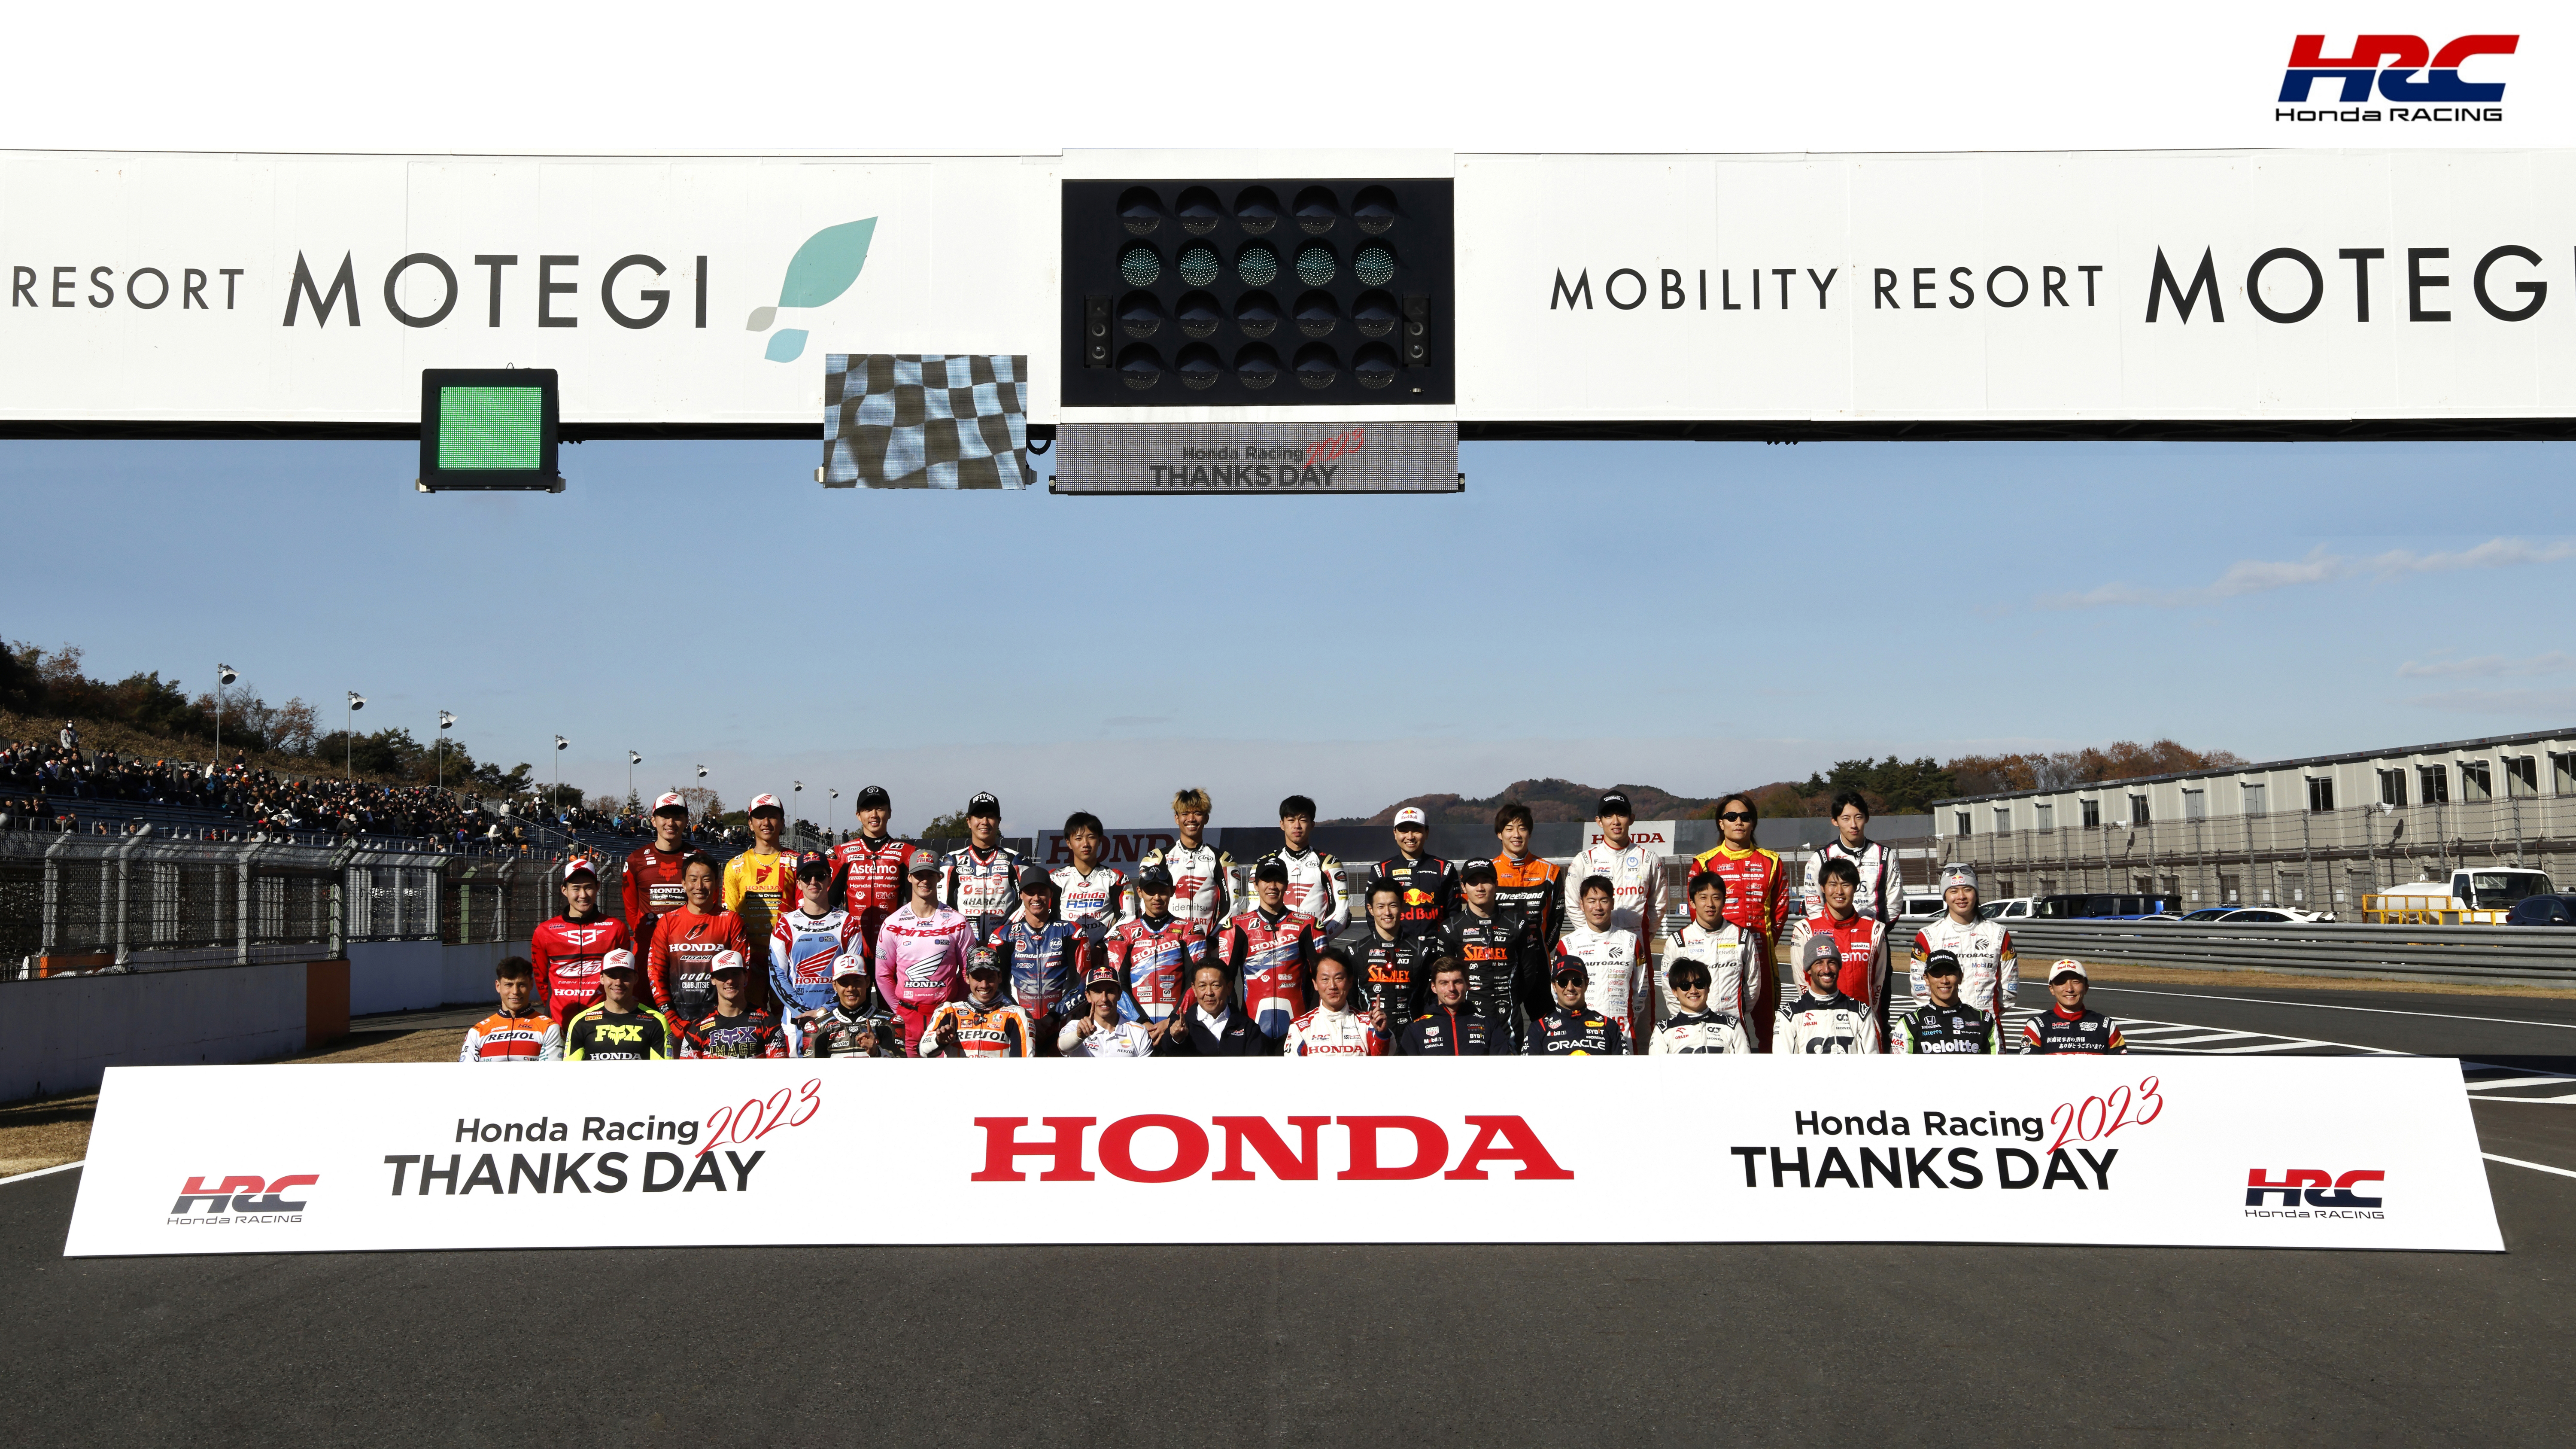 A spectacular event to be held at “MOBILITY RESORT MOTEGI” in Tochigi, Japan where Honda's top class racing riders and drivers join annual “Honda Racing THANKS DAY” to demonstrate dream performance.